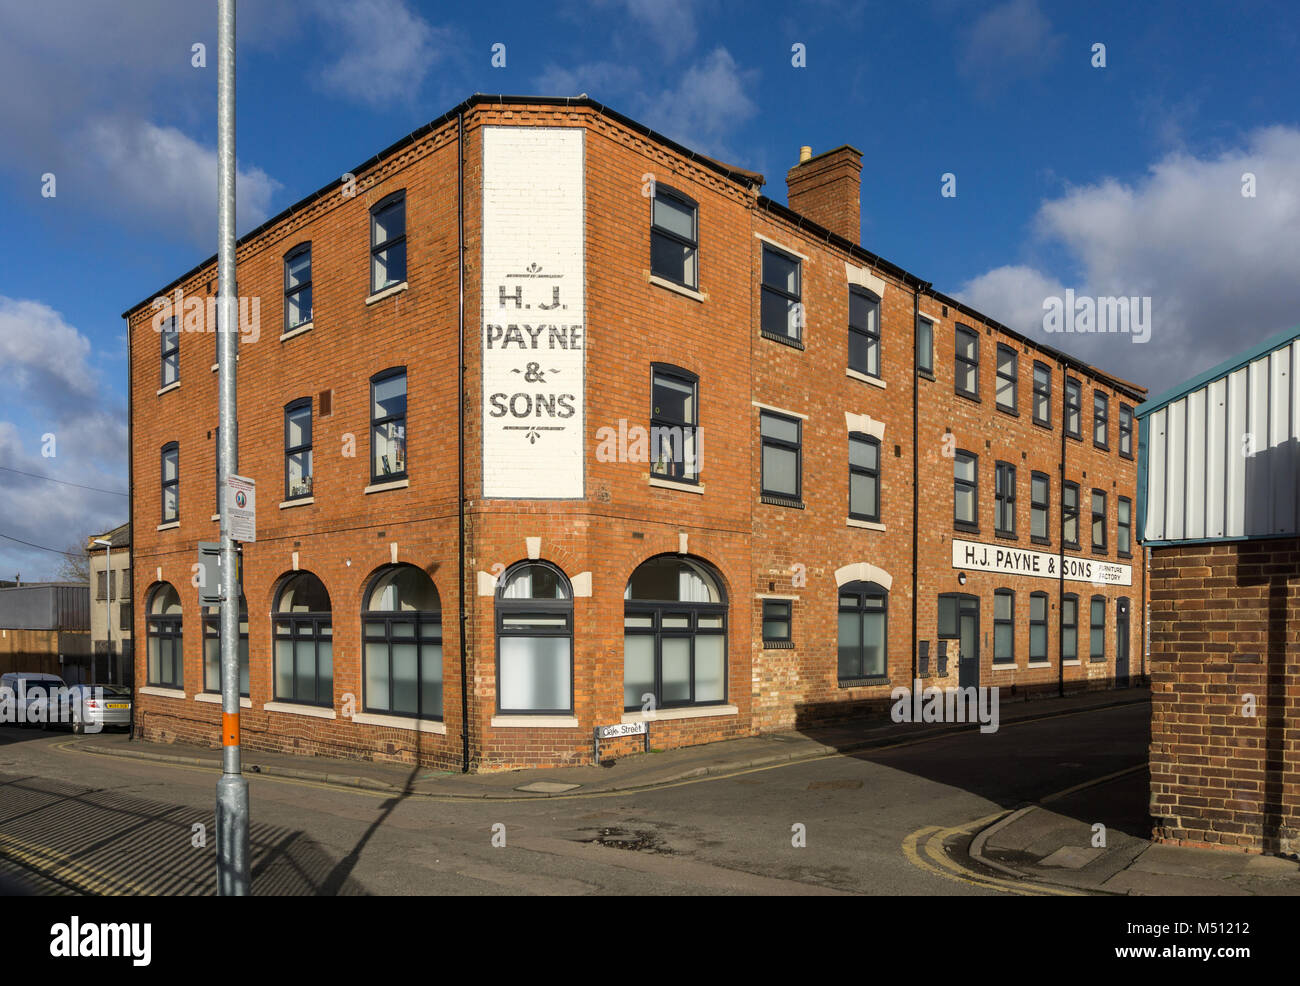 The former H J  Payne & Sons furniture factory, Northampton, UK; an old factory now converted into flats for residential use. Stock Photo